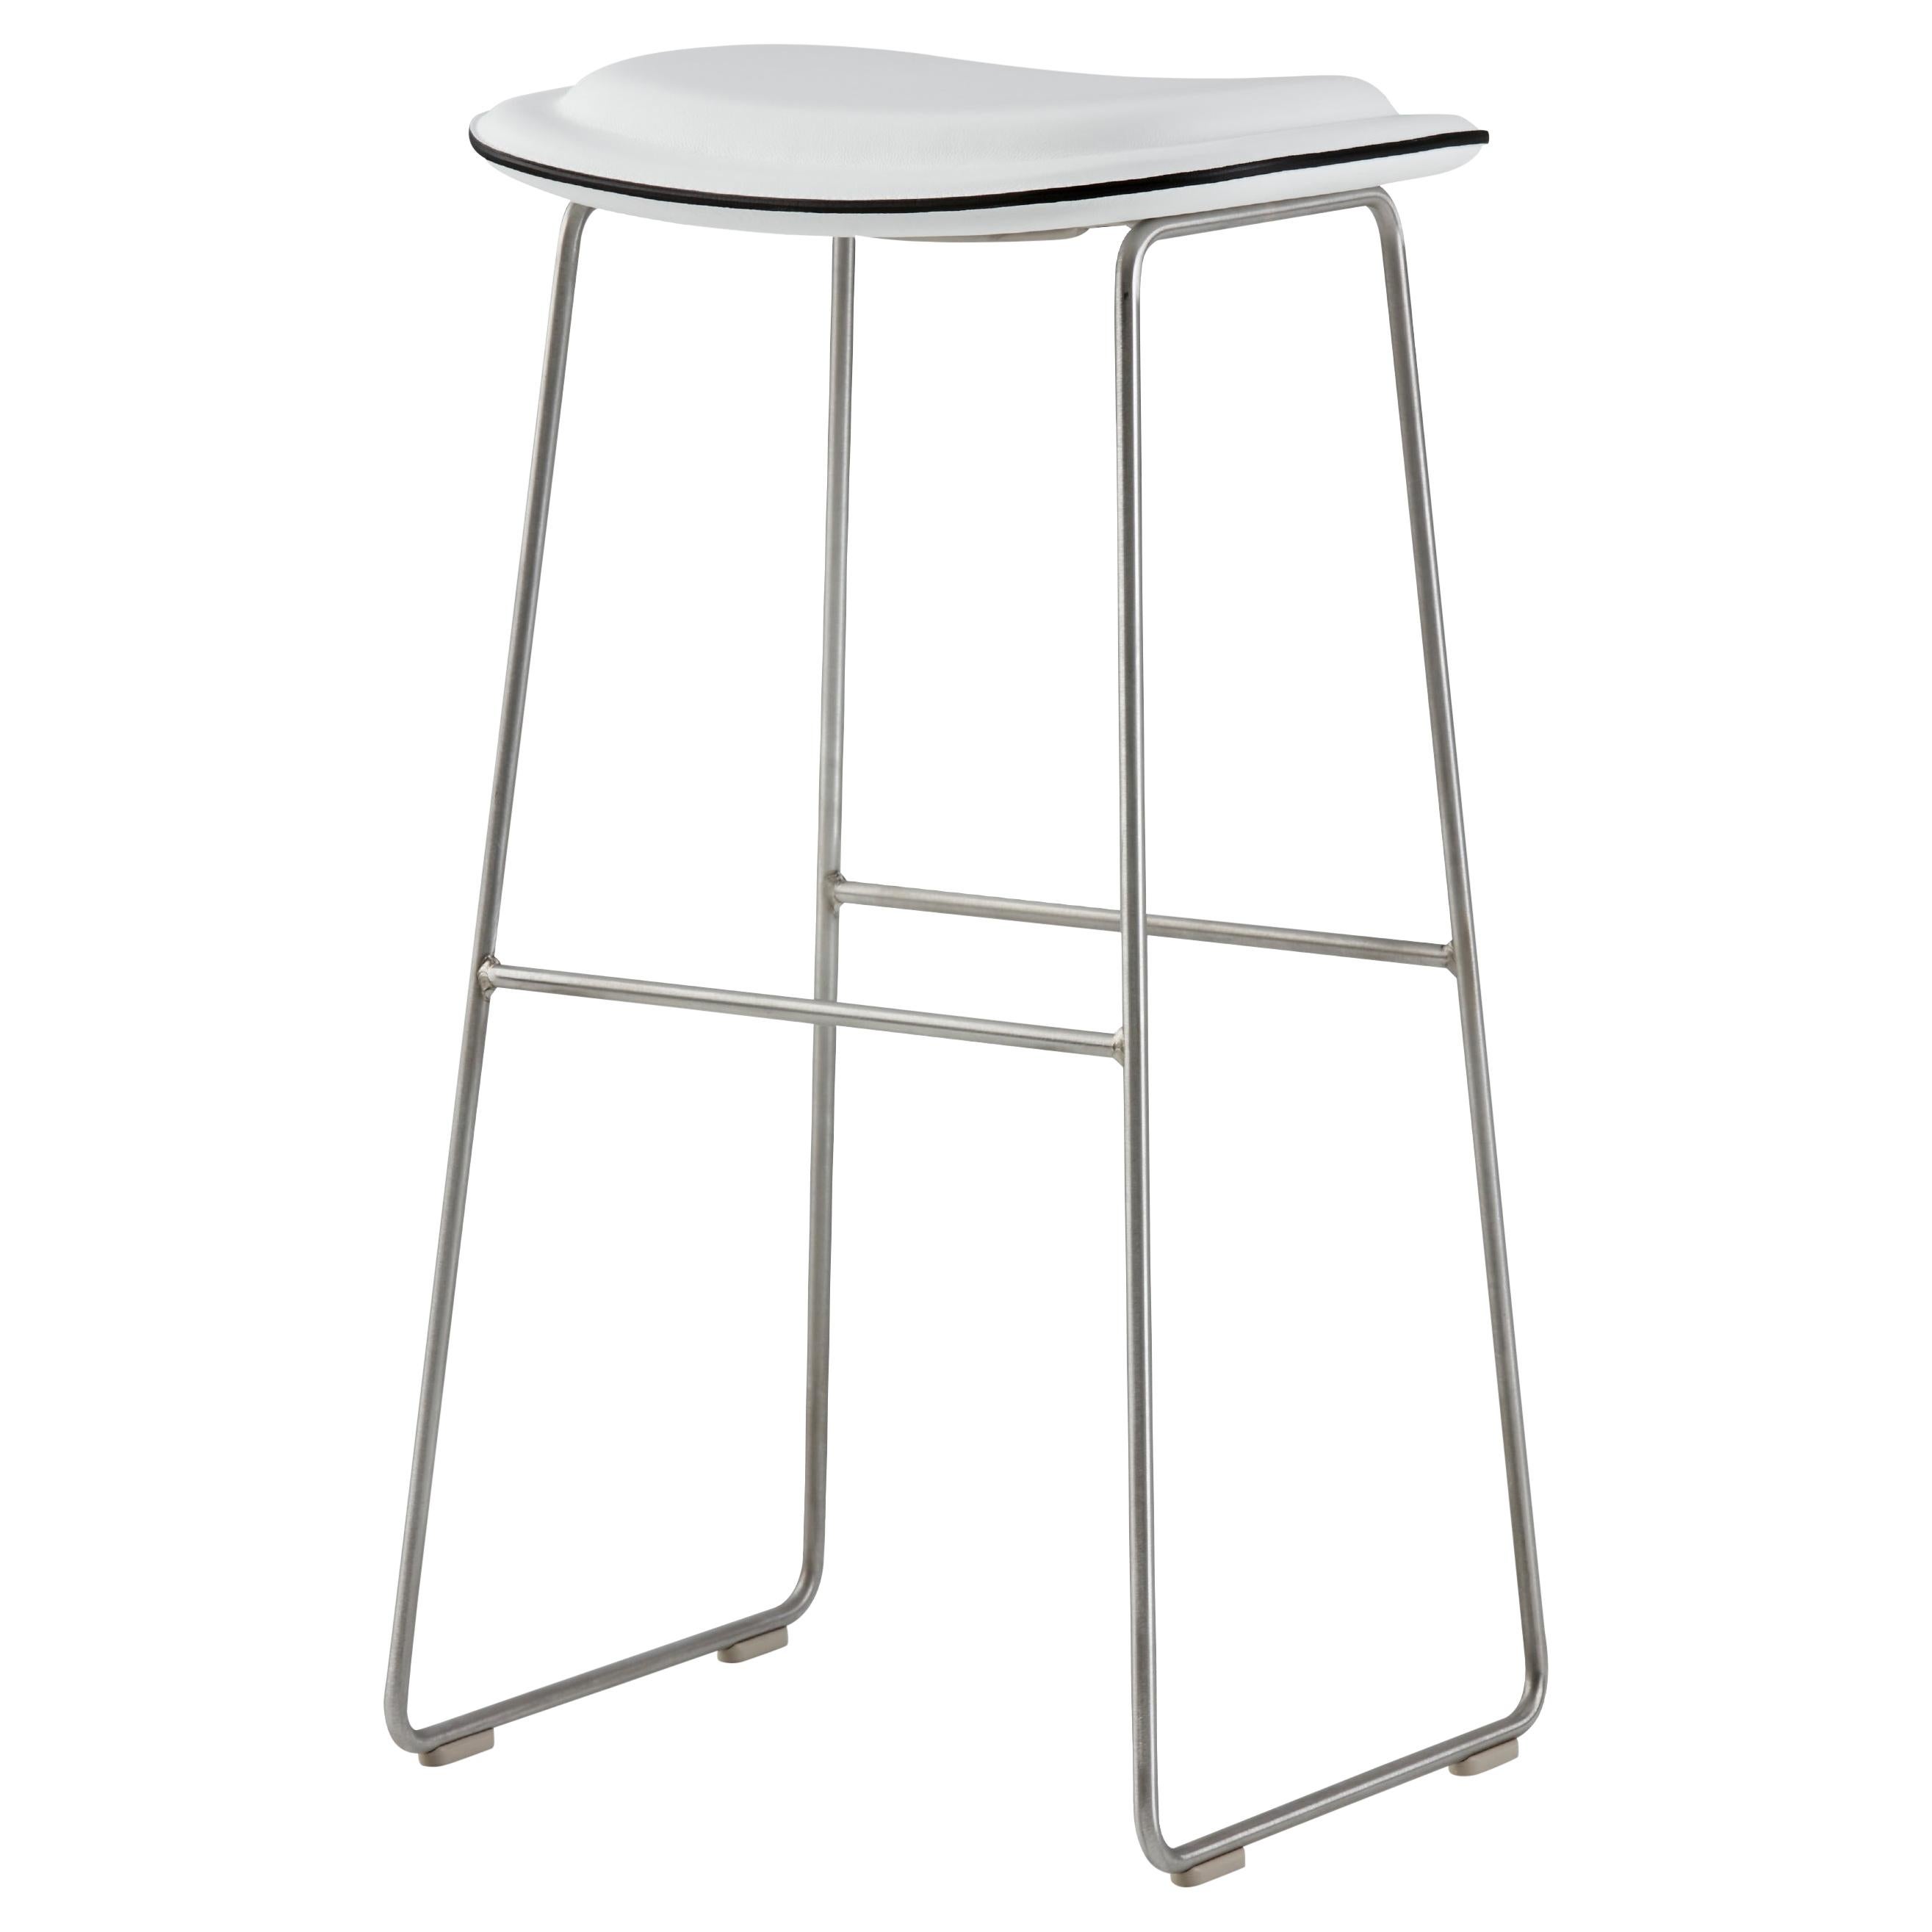 Jasper Morrison Large Hi Pad Bar Stool in White Leather Upholstery by Cappellini For Sale